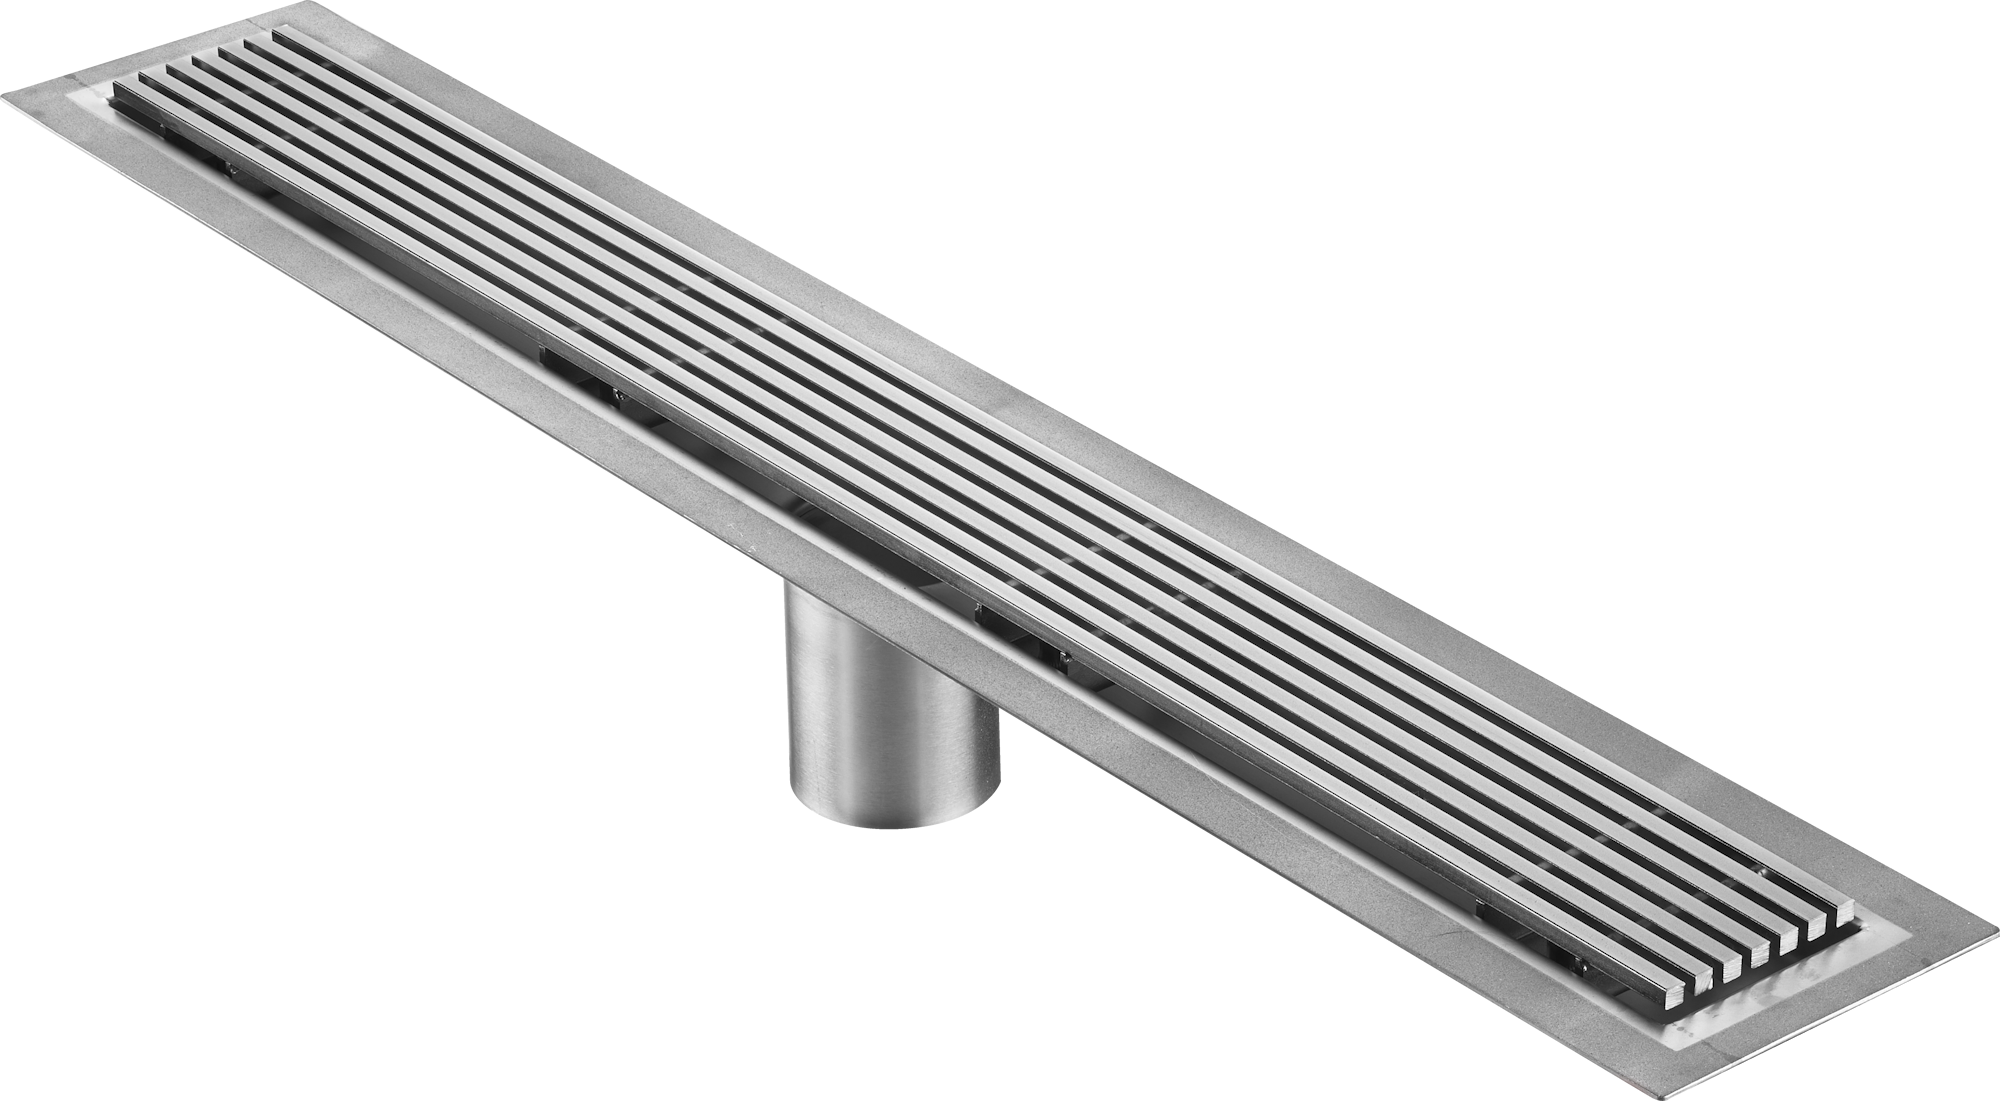 43 Inch Wedge Wire Grate Linear Drain Brushed Stainless Steel, Drains Unlimited